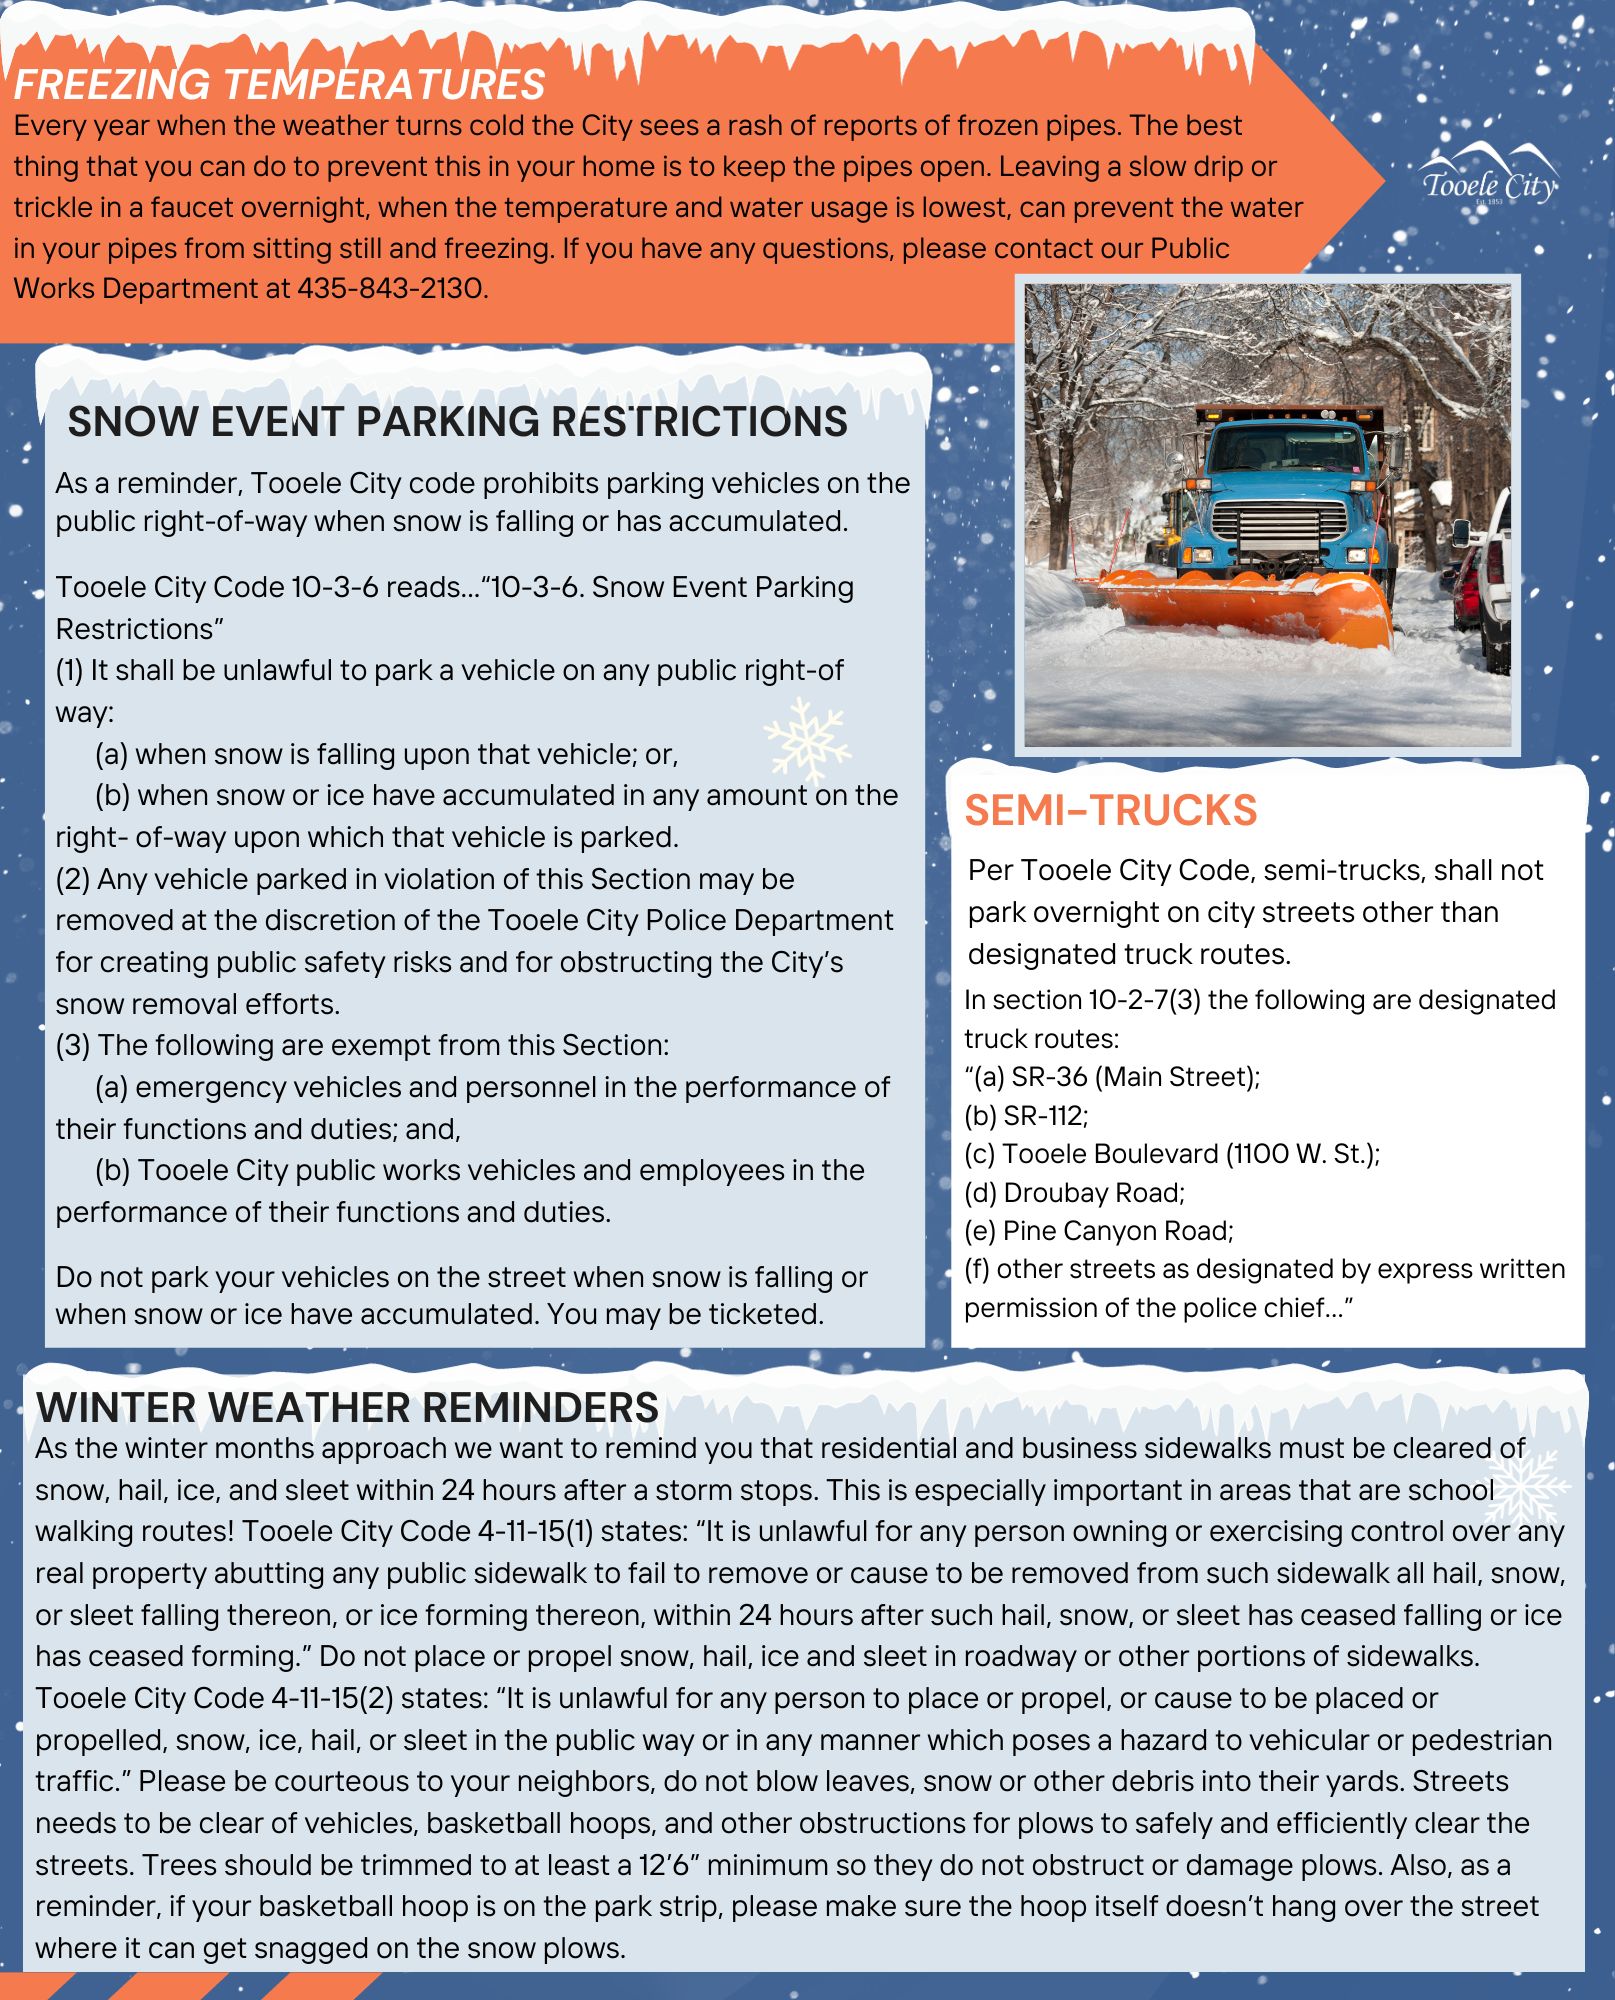 Winter Restrictions and Reminders Infographic